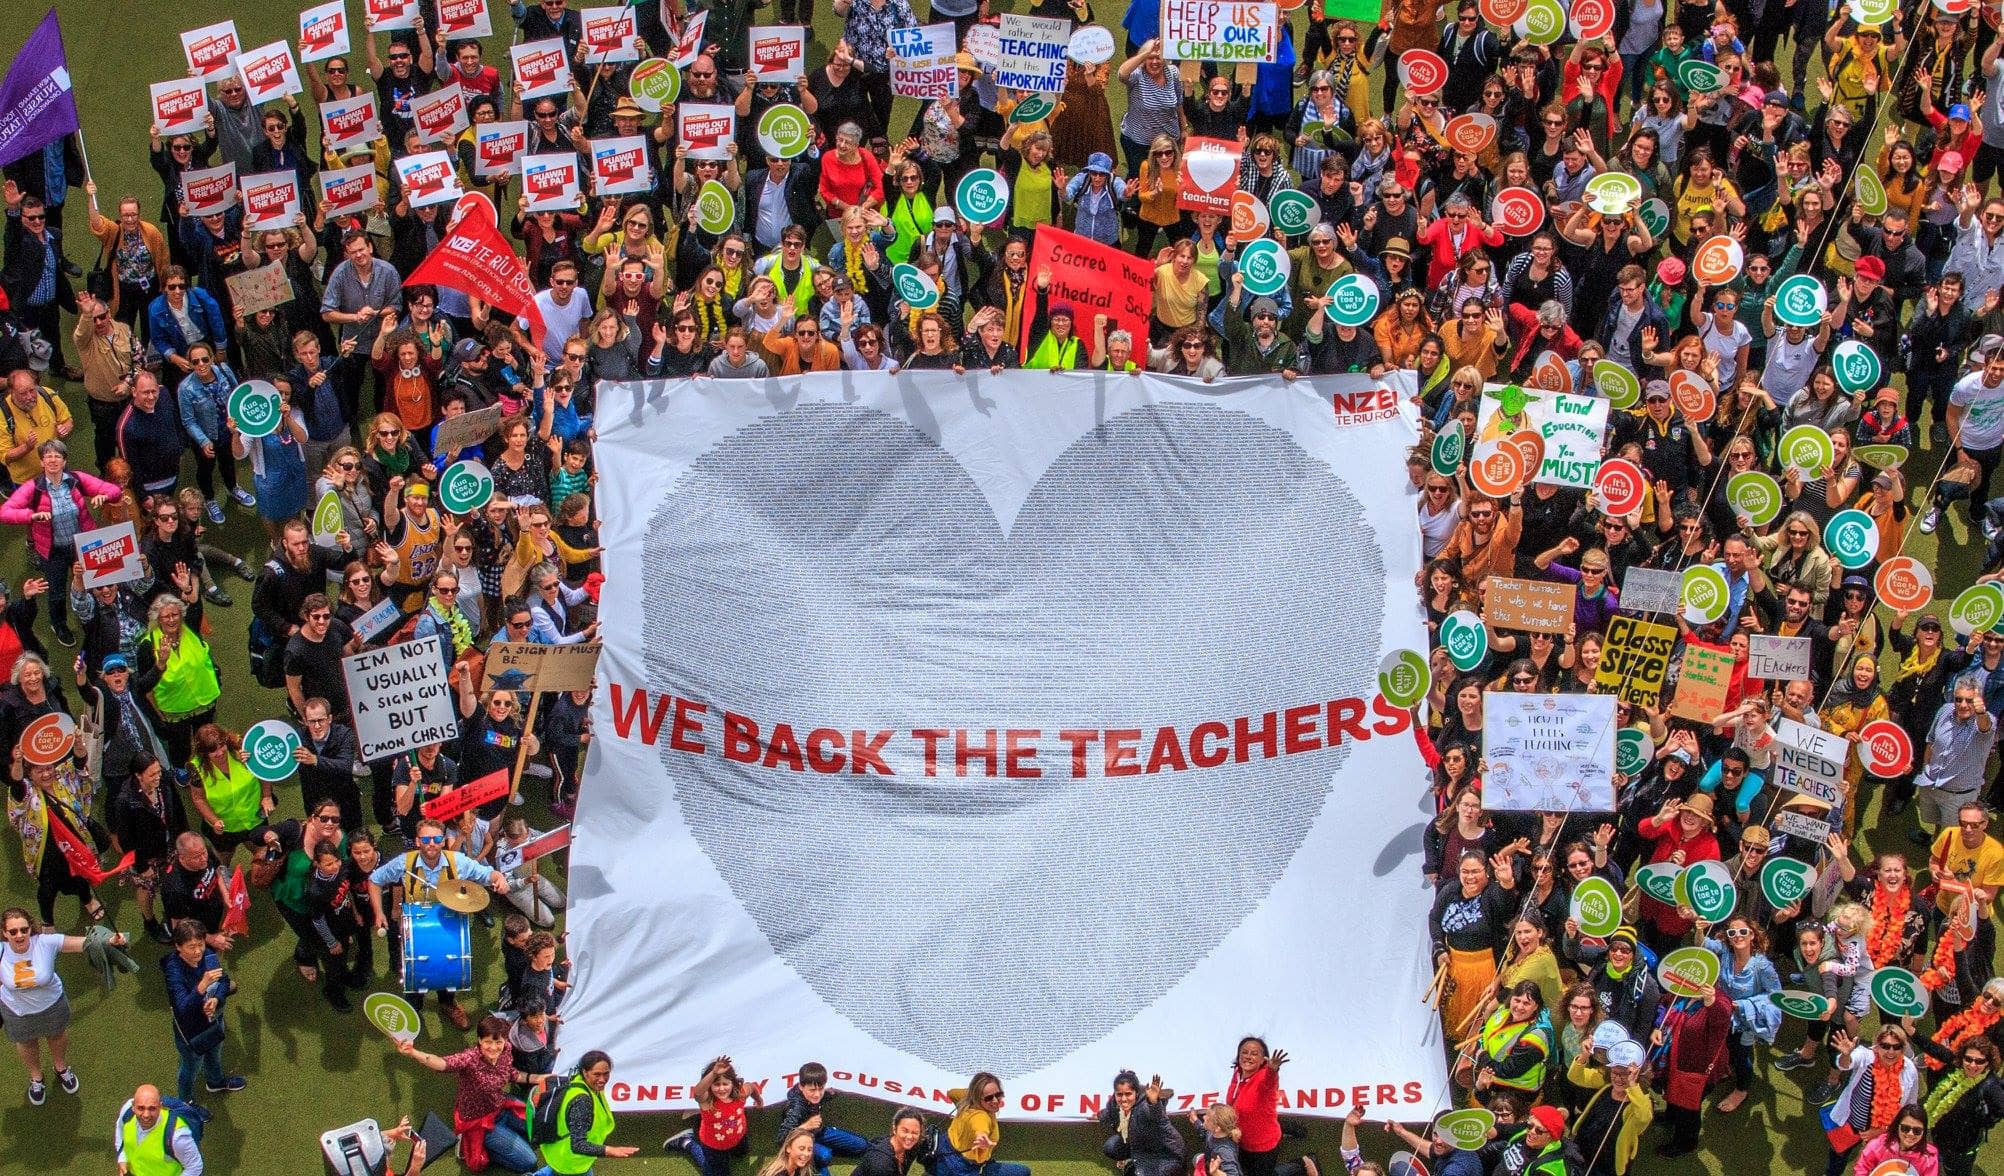 Huge and colorful crowd of union and teacher supporters in a field with a banner reading “We back the teachers”